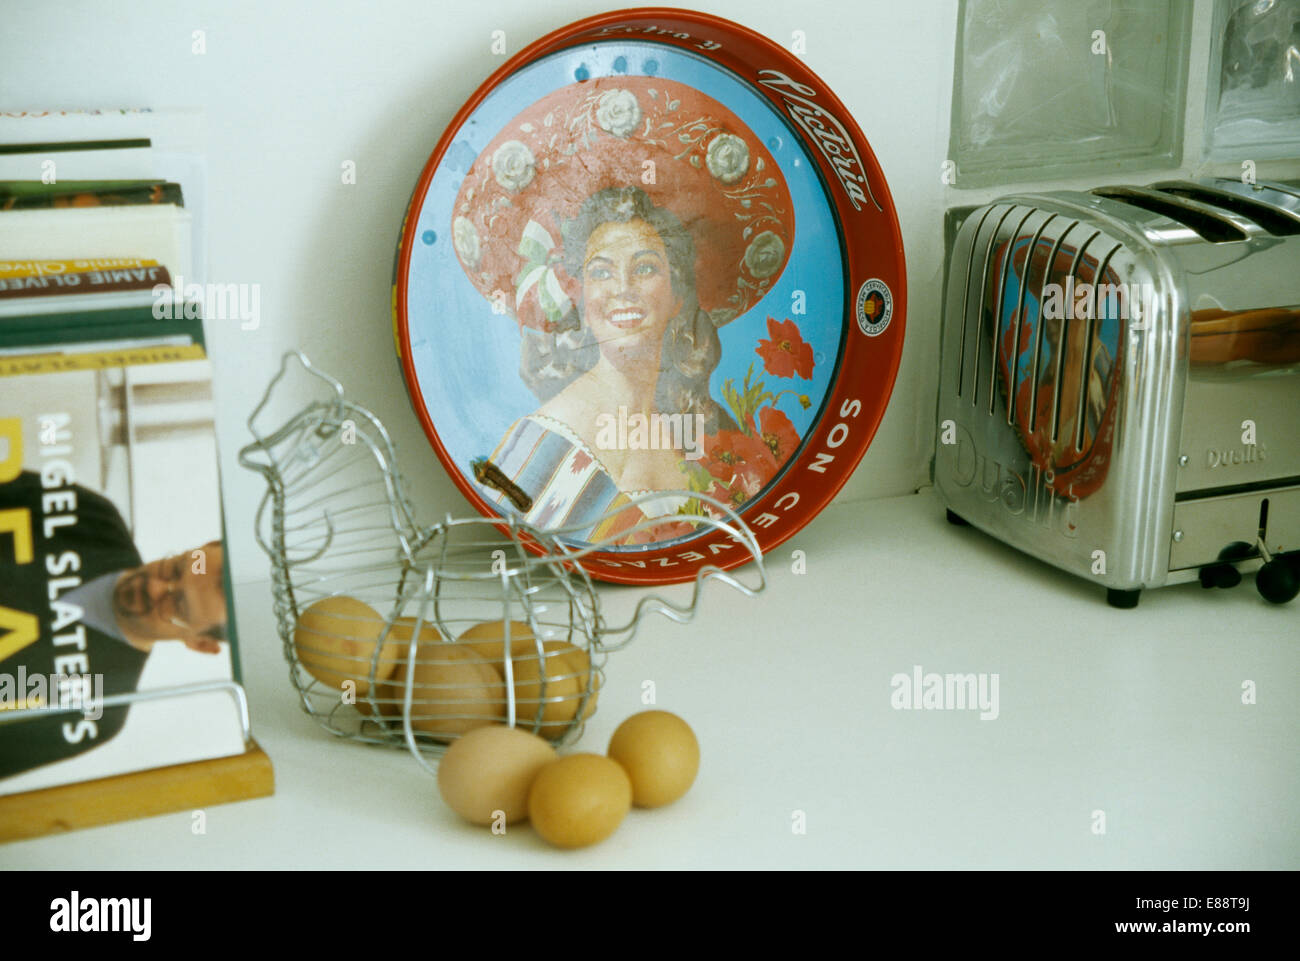 https://c8.alamy.com/comp/E88T9J/close-up-of-retro-pictorial-forties-tray-on-worktop-with-wire-basket-E88T9J.jpg